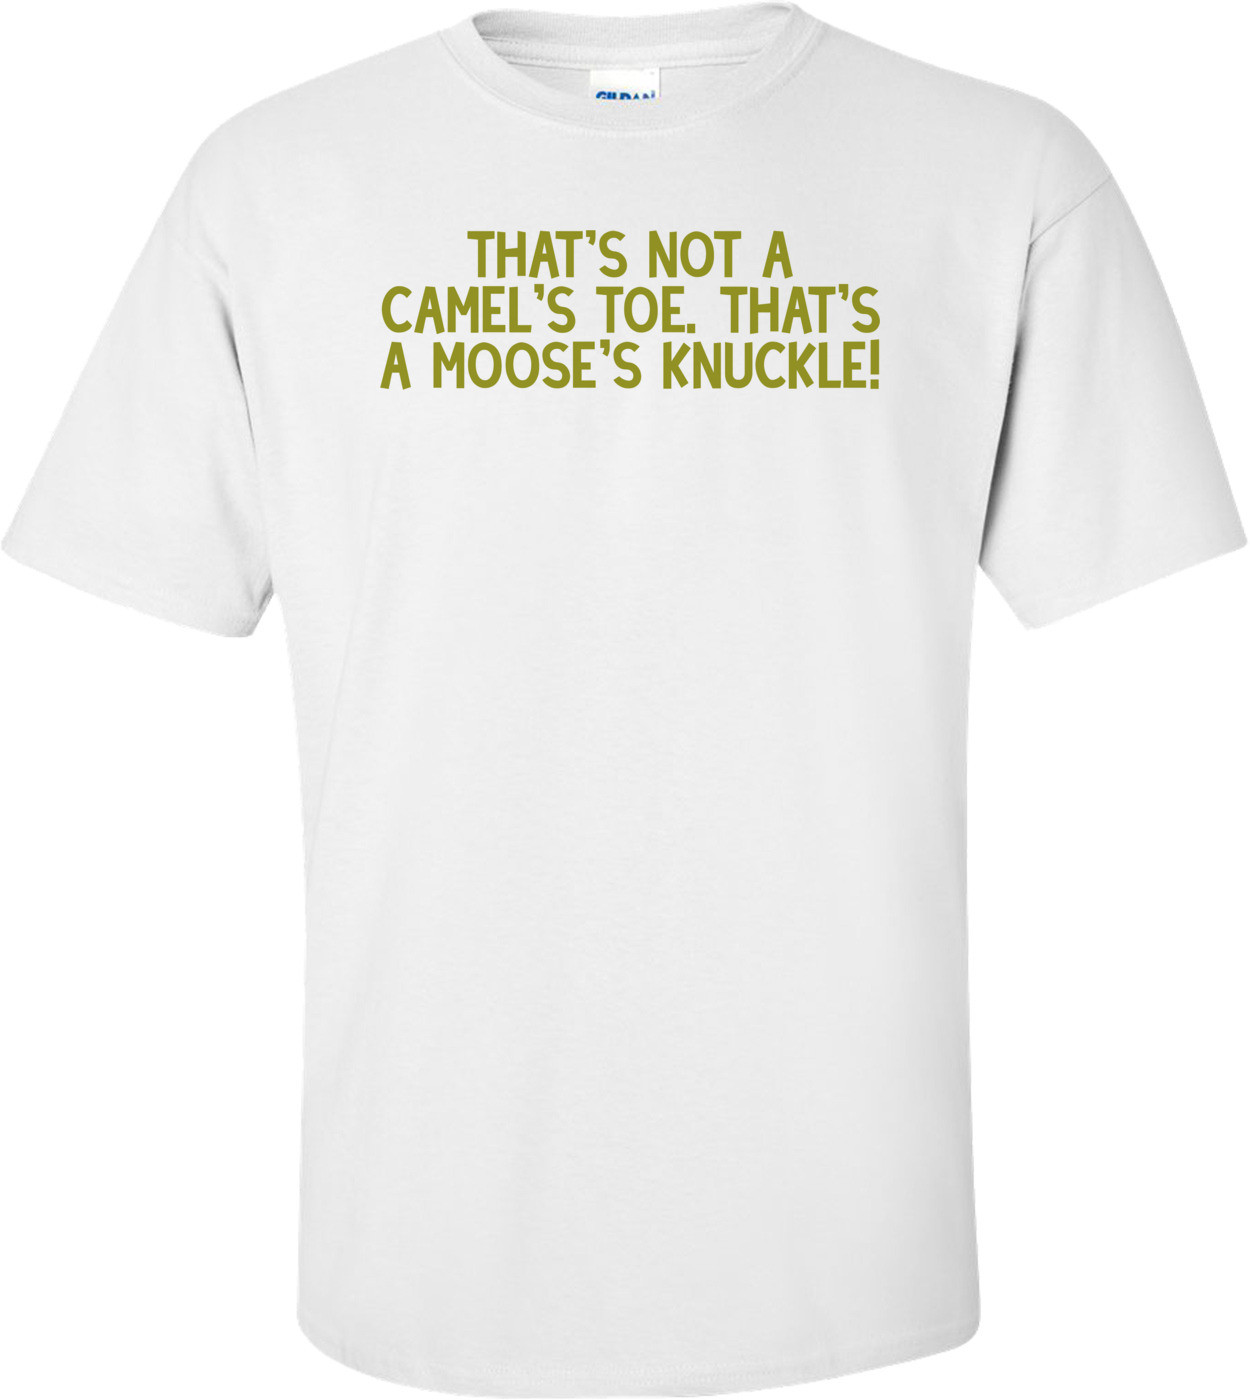 That's not a camel's toe. That's a moose's knuckle! Shirt